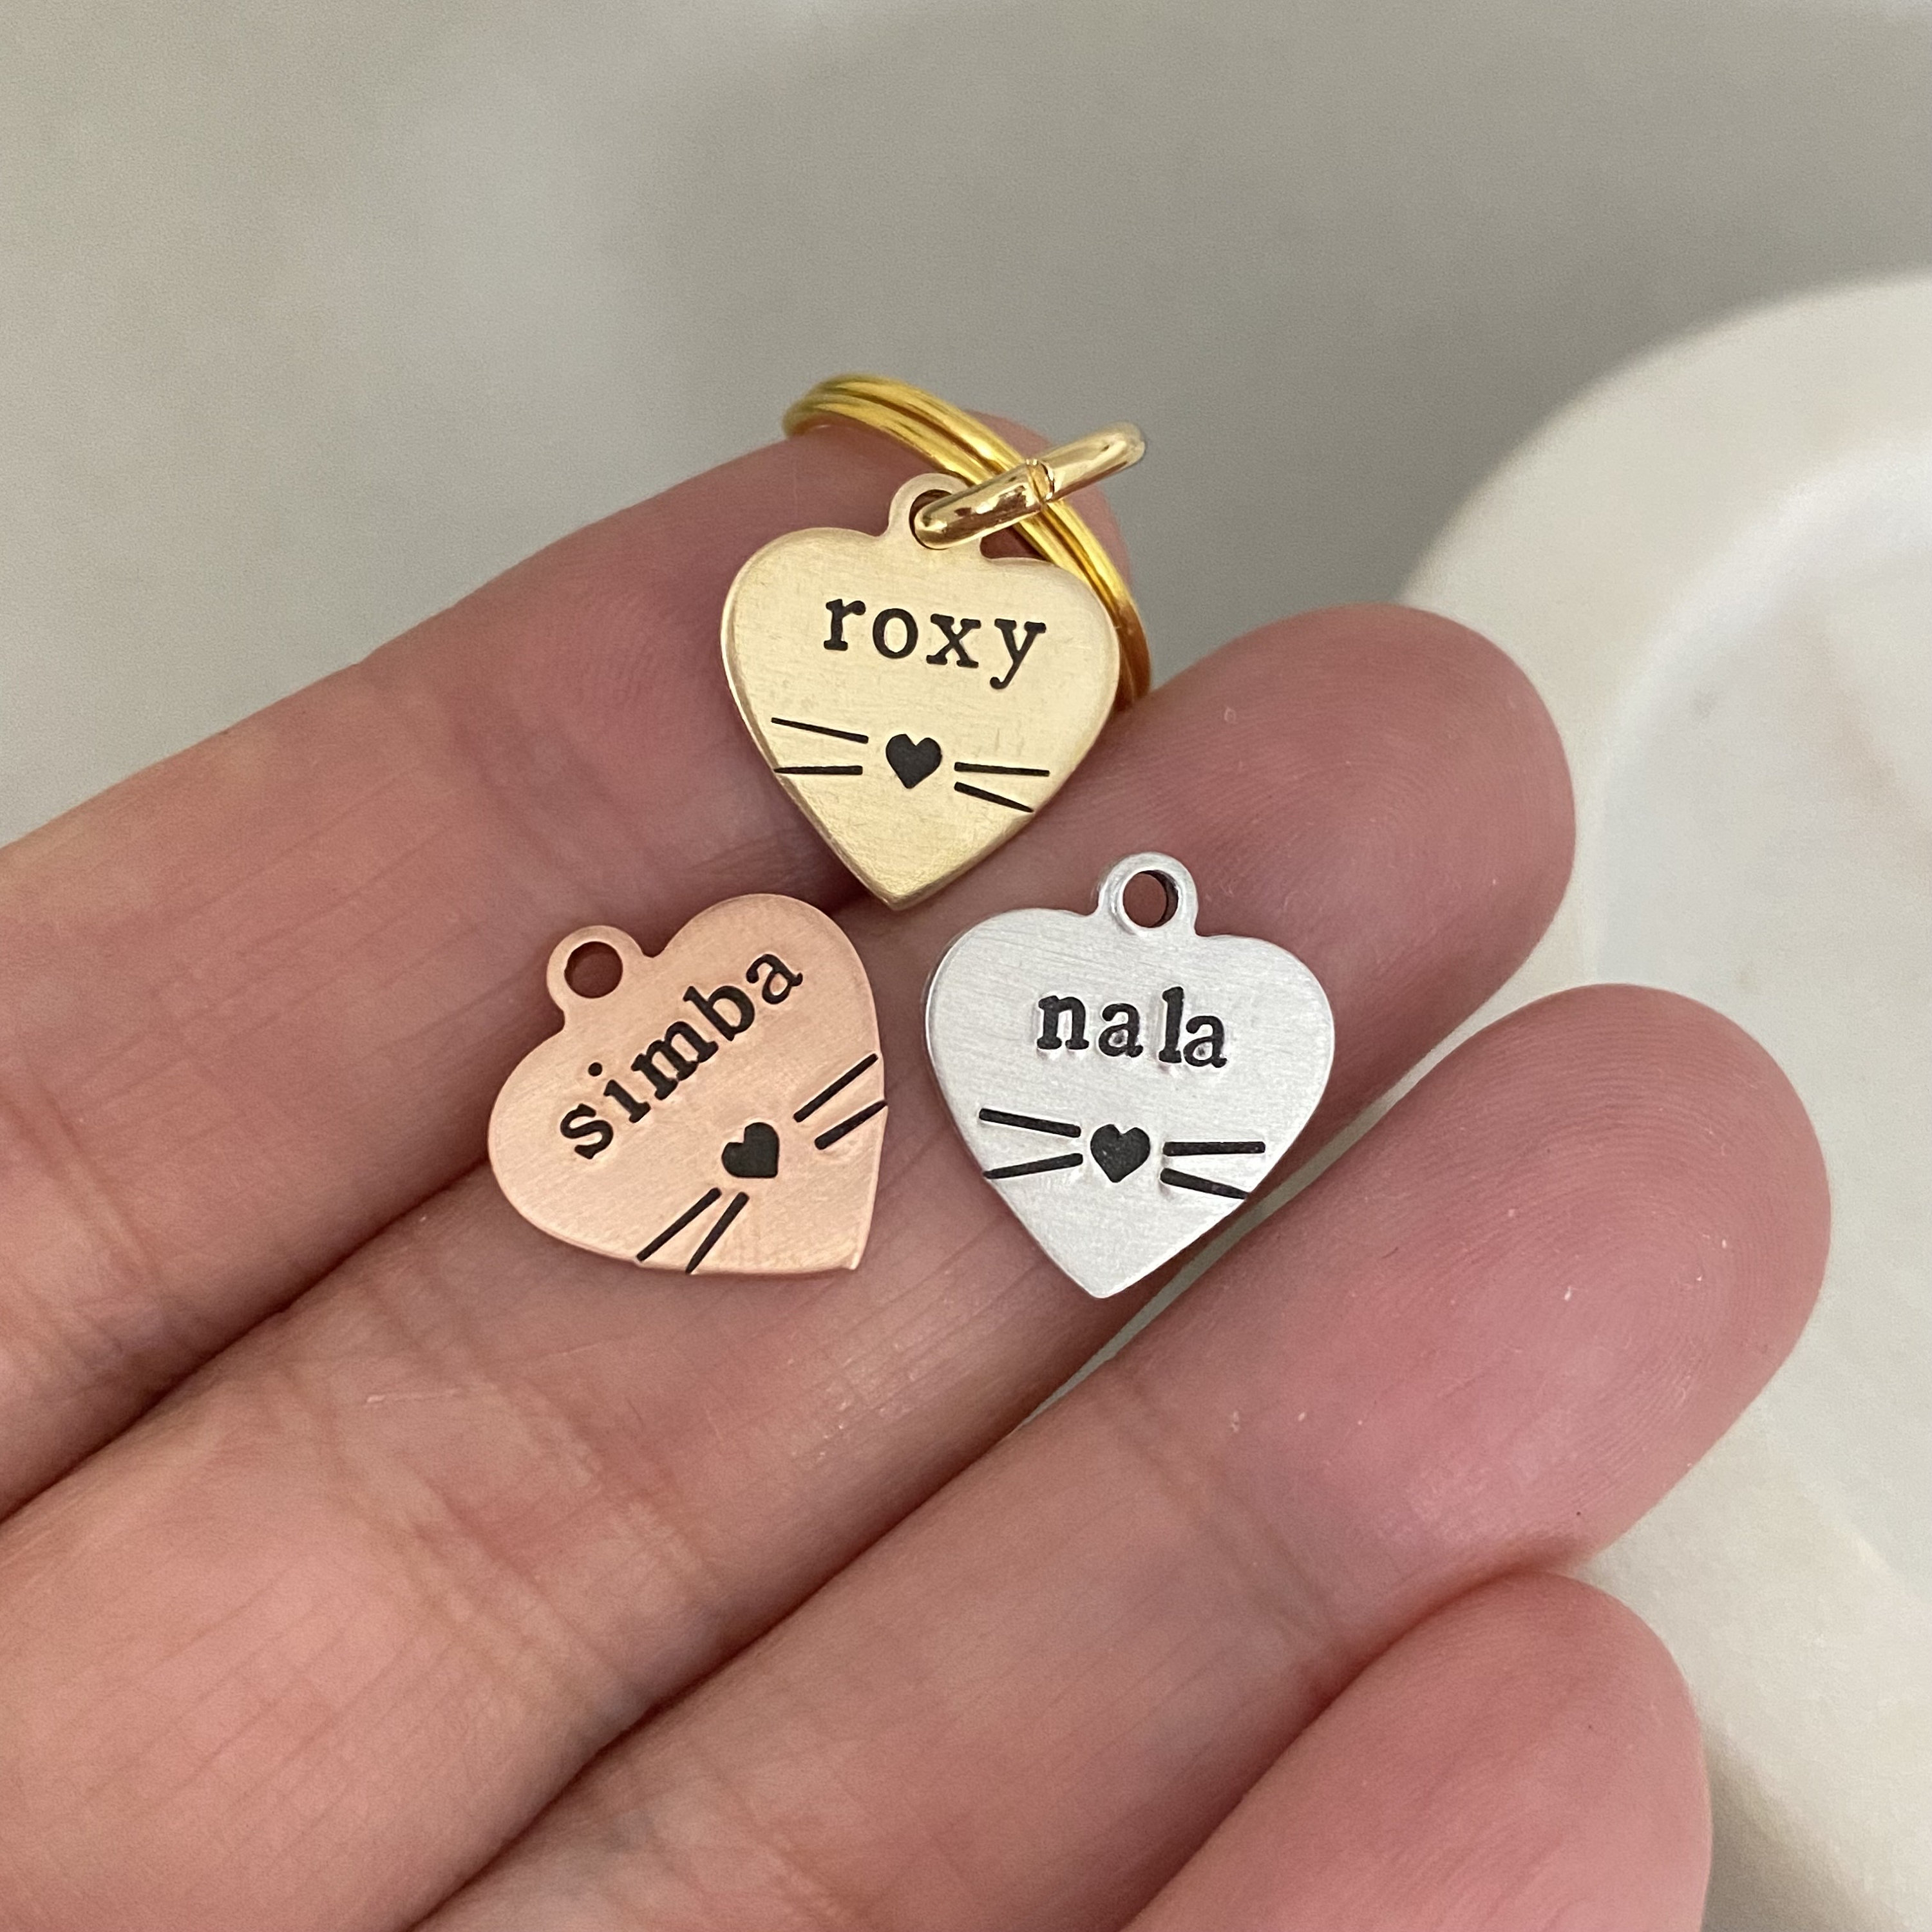 Pet Tag, Dog Tag for Dog, Gift for Pet Owner, Round, Name and Phone Number,  Silver, Brass, Name Tag for Pet 